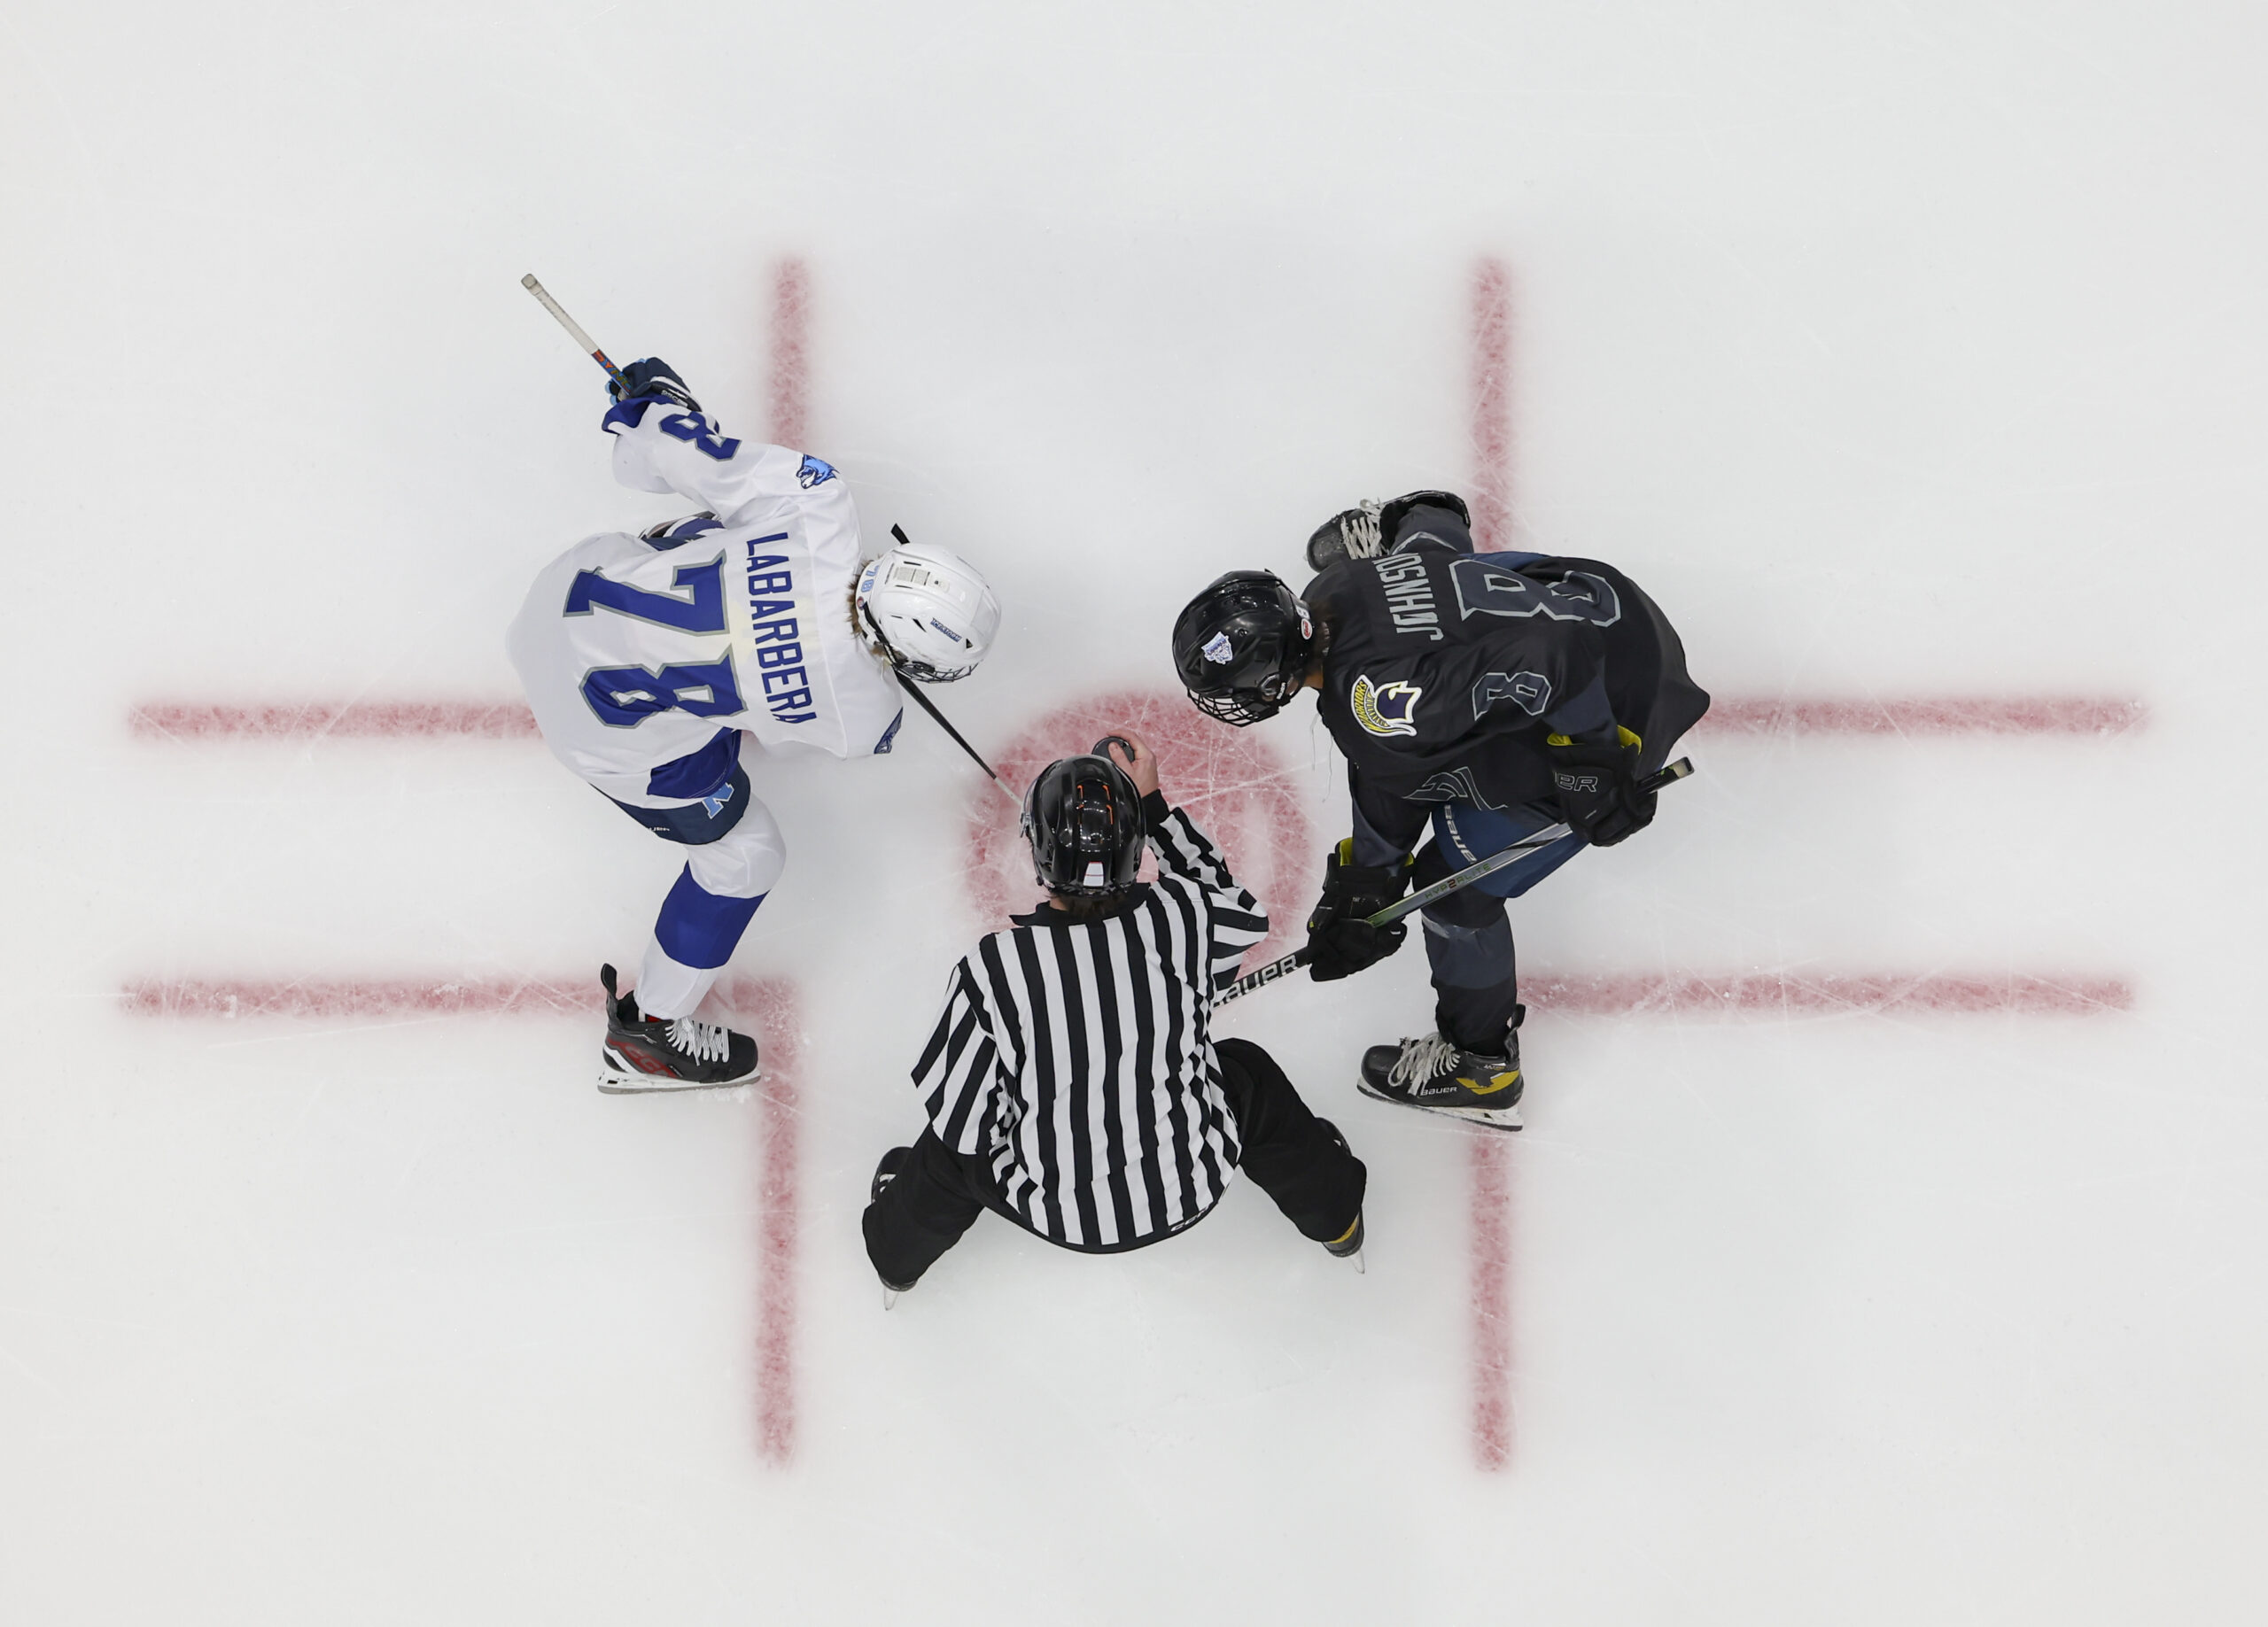 TAMPA, FL - JANUARY 17: The 2023-24 Lightning High School Hockey League All-Star Game on January 17, 2024 at Amalie Arena in Tampa, FL (Mark LoMoglio/Tampa Bay Lightning)